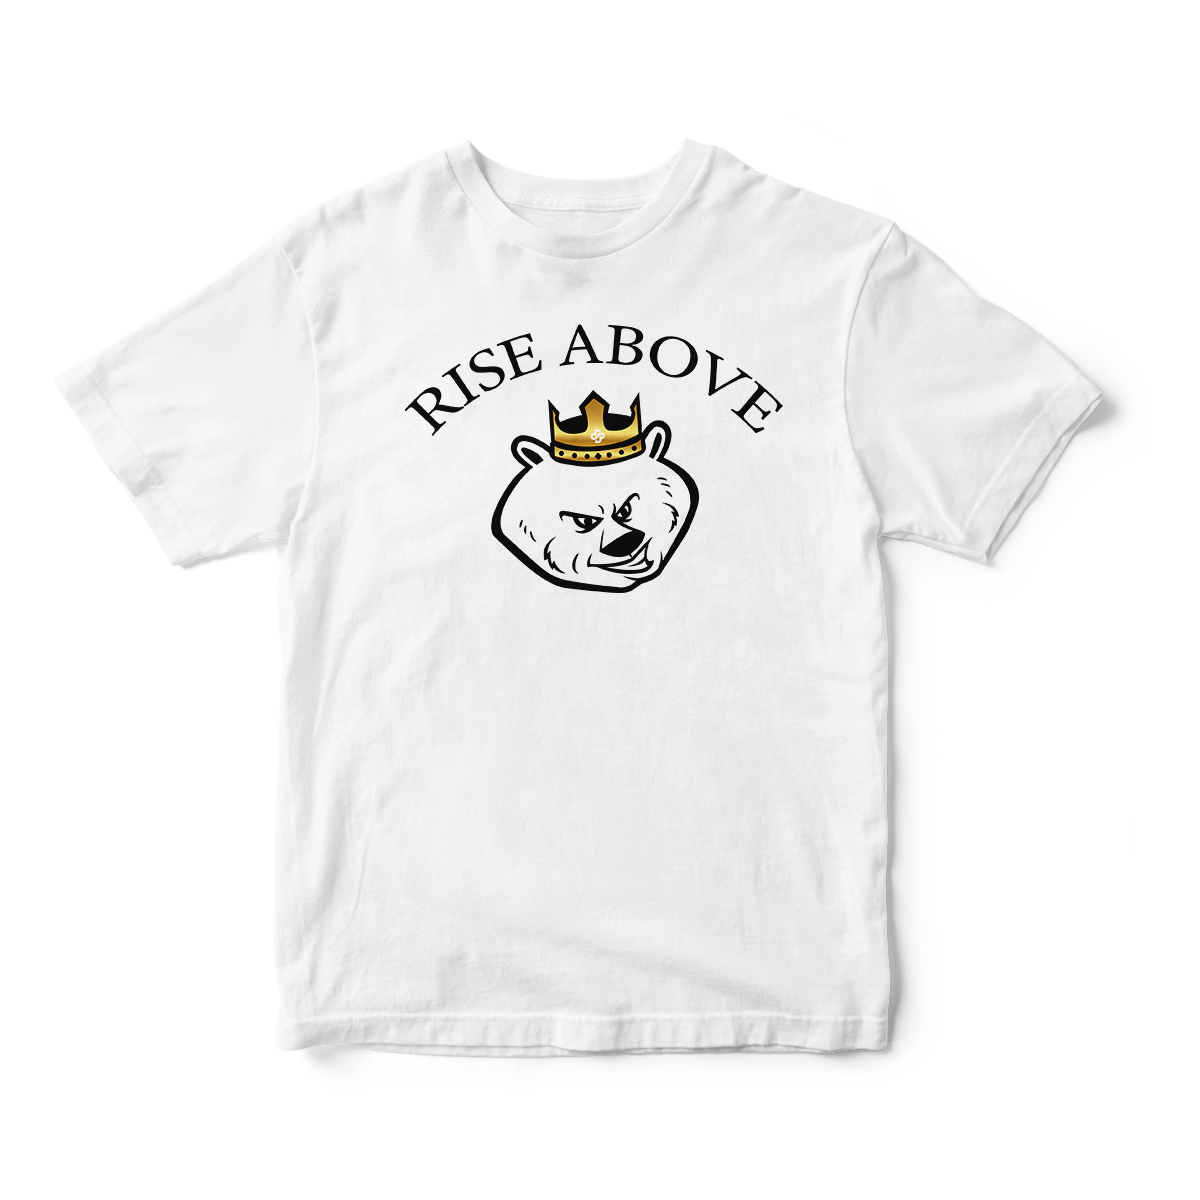 Rise Above in Gold Short Sleeve Tee